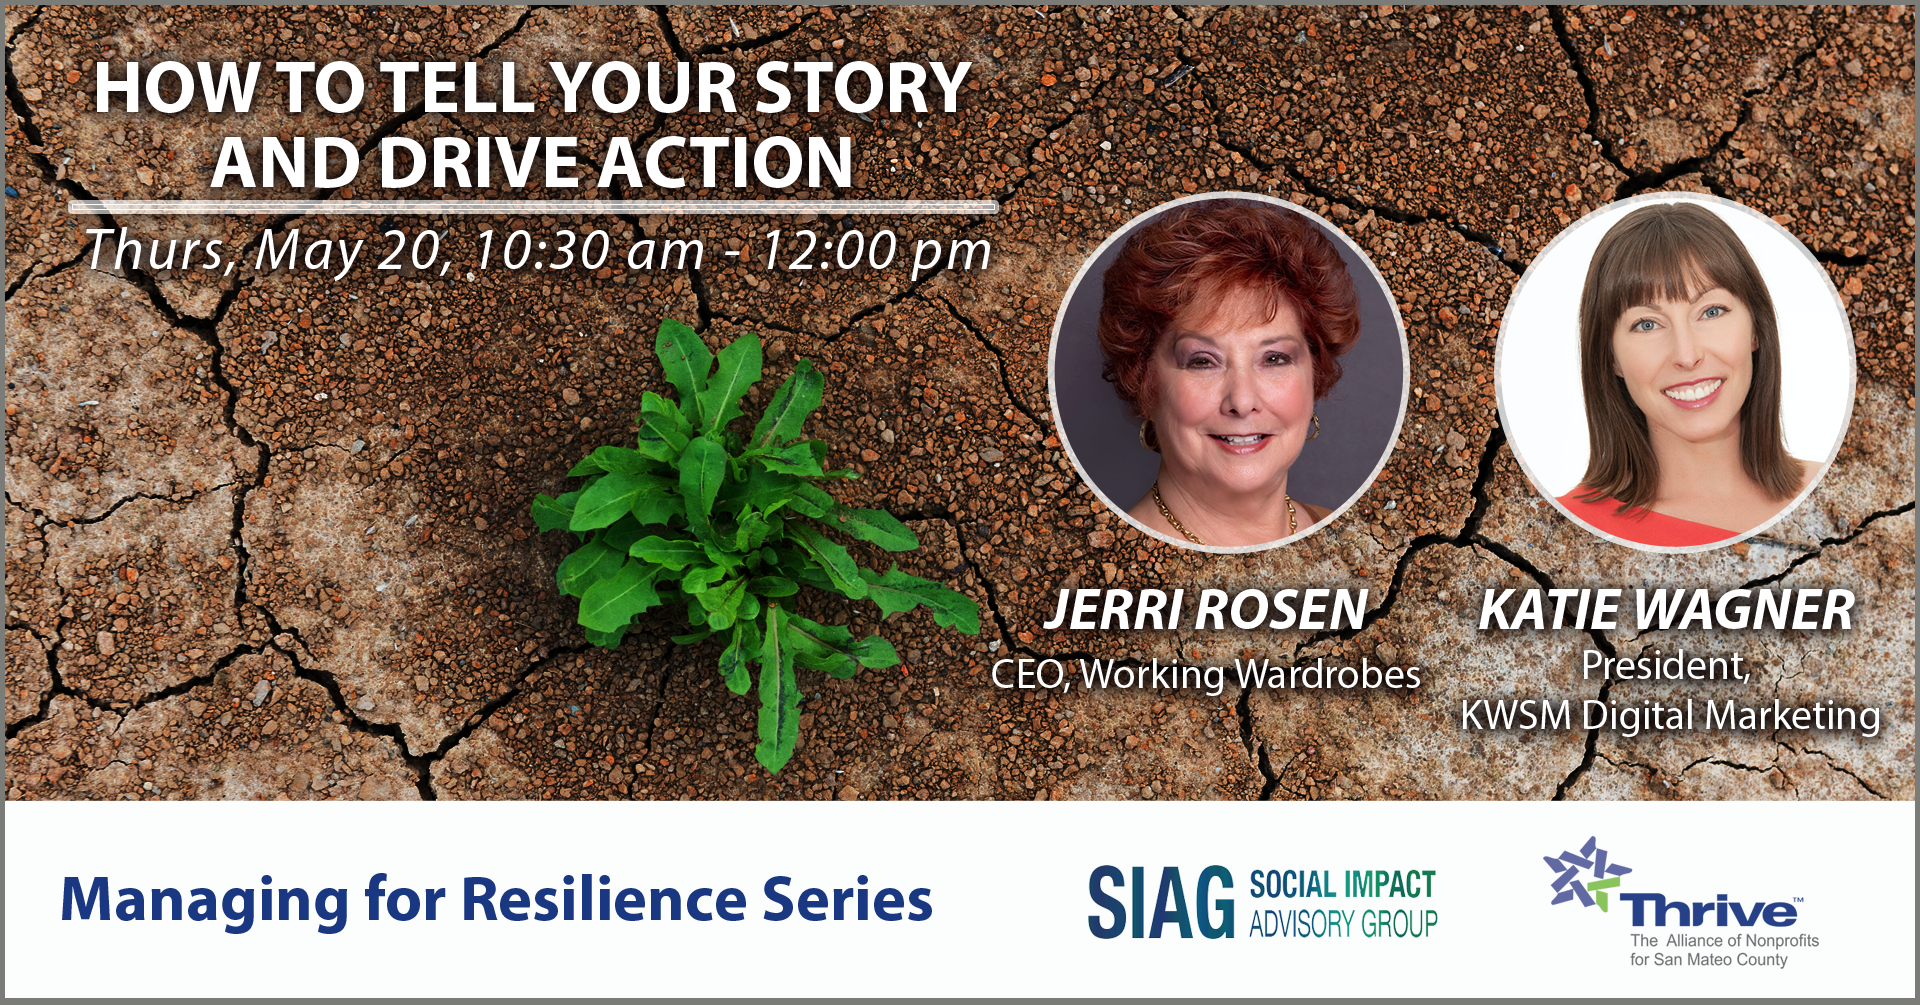 May 20, 2021: Thrive &amp; SIAG: Managing for Resilience How to Tell Your Story &amp; Drive Action